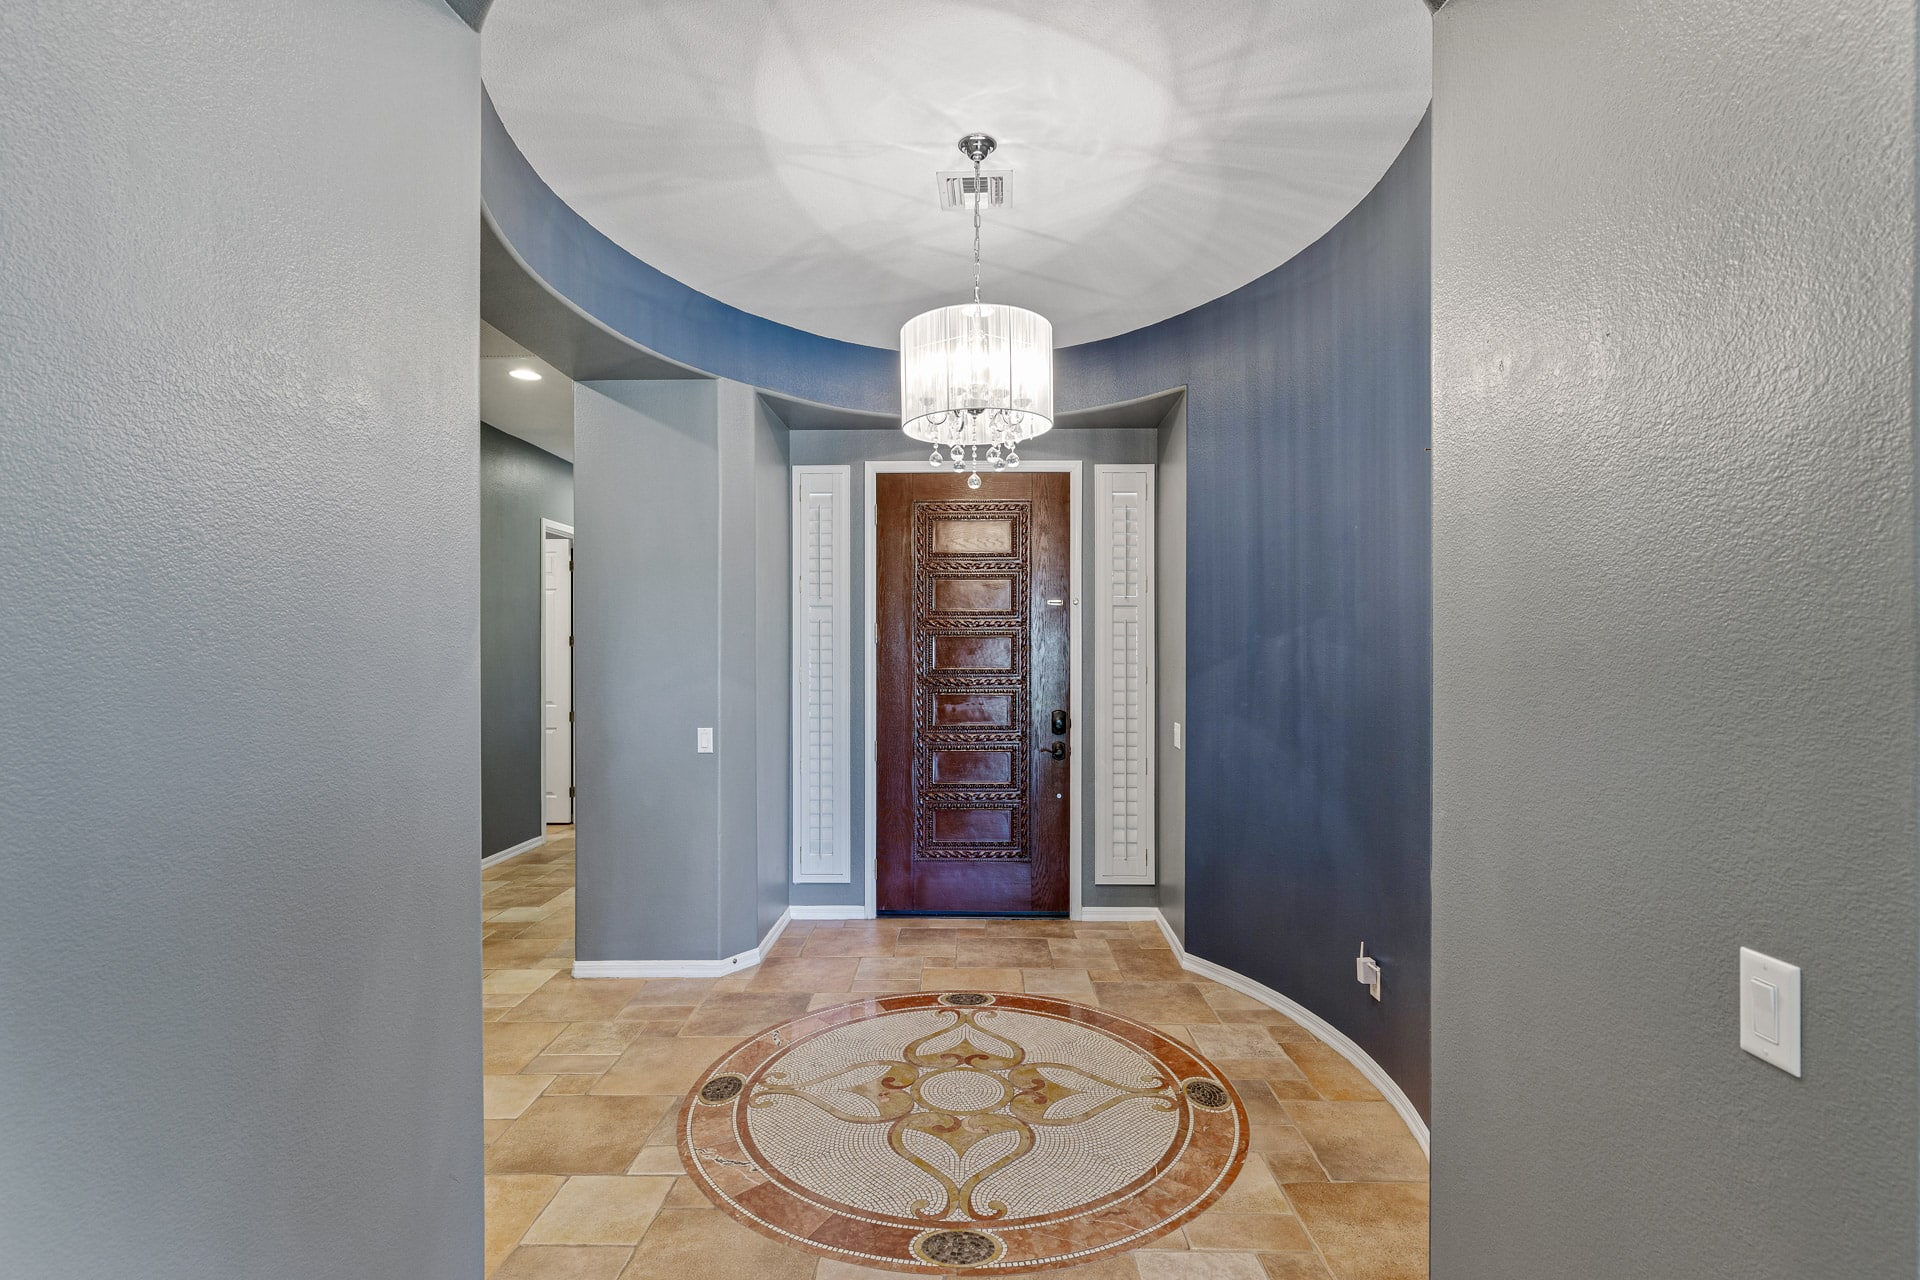 61-fountainhead-circle-hednerson-anthem-country-club-las-vegas-guard-gated-luxury-real-estate-realtor-rob-jensen-company-08